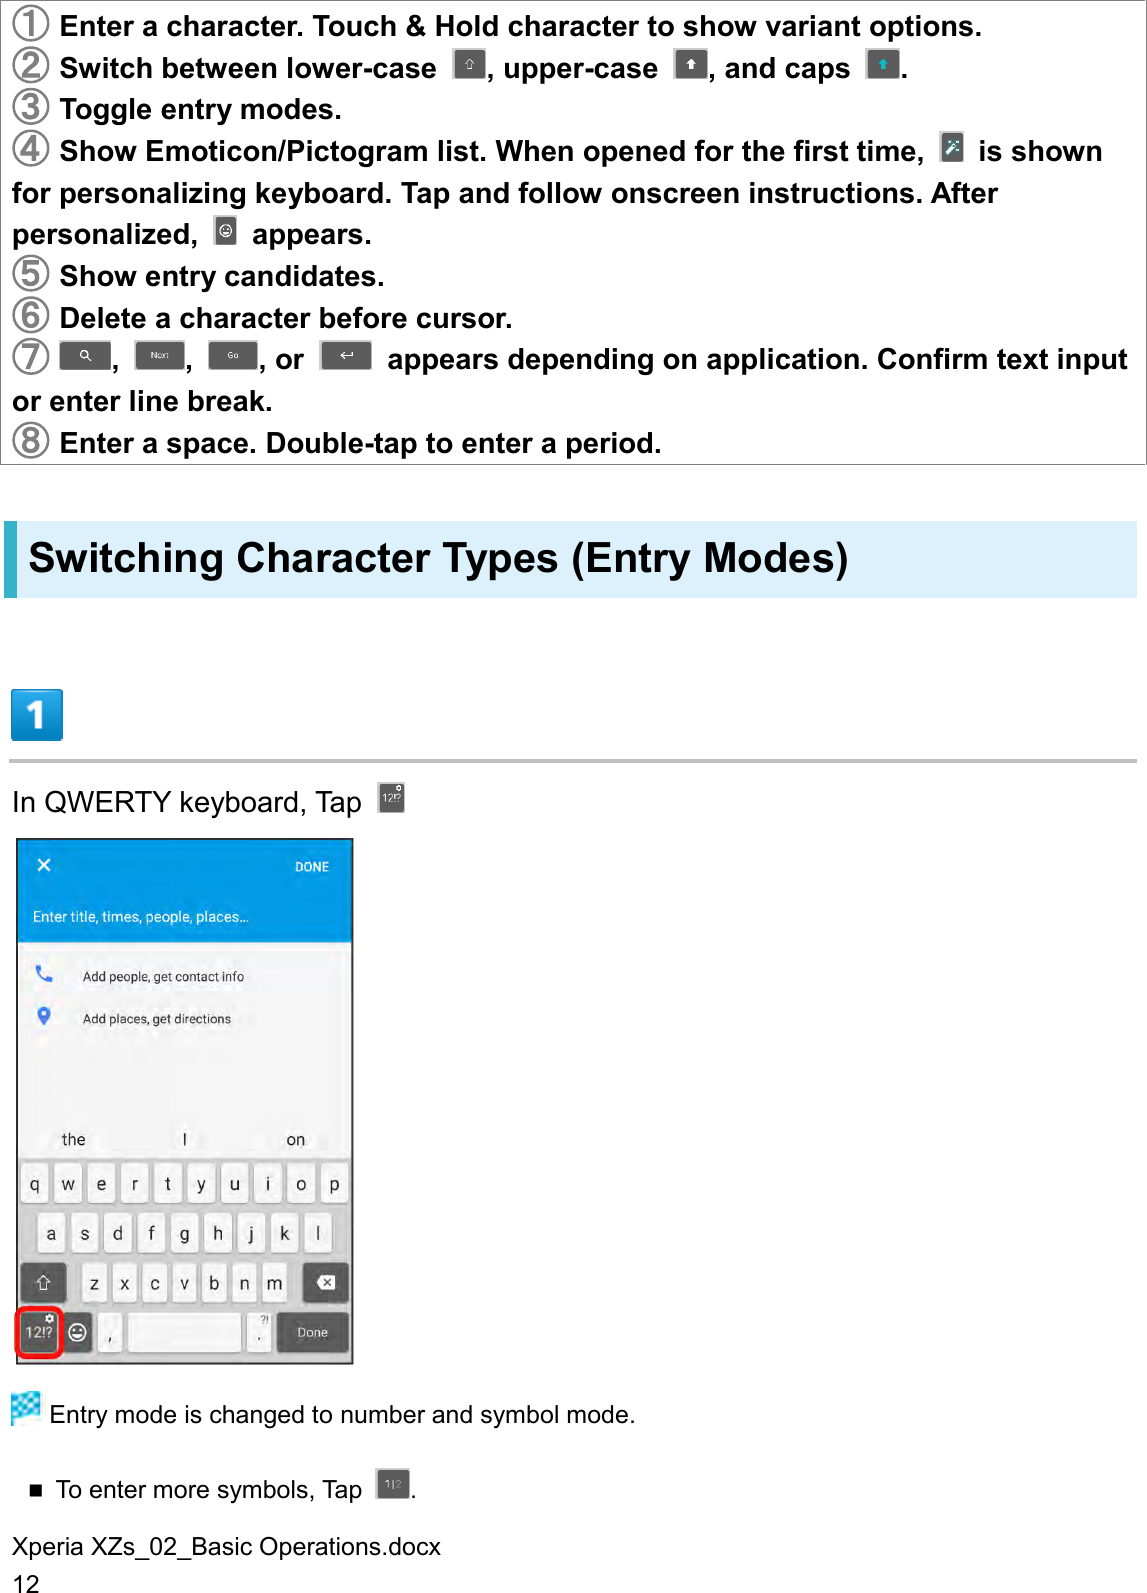 Xperia XZs_02_Basic Operations.docx 12 󲬠 Enter a character. Touch &amp; Hold character to show variant options. 󲬡 Switch between lower-case  , upper-case  , and caps  . 󲬢 Toggle entry modes. 󲬣 Show Emoticon/Pictogram list. When opened for the first time,    is shown for personalizing keyboard. Tap and follow onscreen instructions. After personalized,    appears. 󲬤 Show entry candidates. 󲬥 Delete a character before cursor. 󲬦 ,  ,  , or    appears depending on application. Confirm text input or enter line break. 󲬧 Enter a space. Double-tap to enter a period. Switching Character Types (Entry Modes)  In QWERTY keyboard, Tap     Entry mode is changed to number and symbol mode.  To enter more symbols, Tap  . 